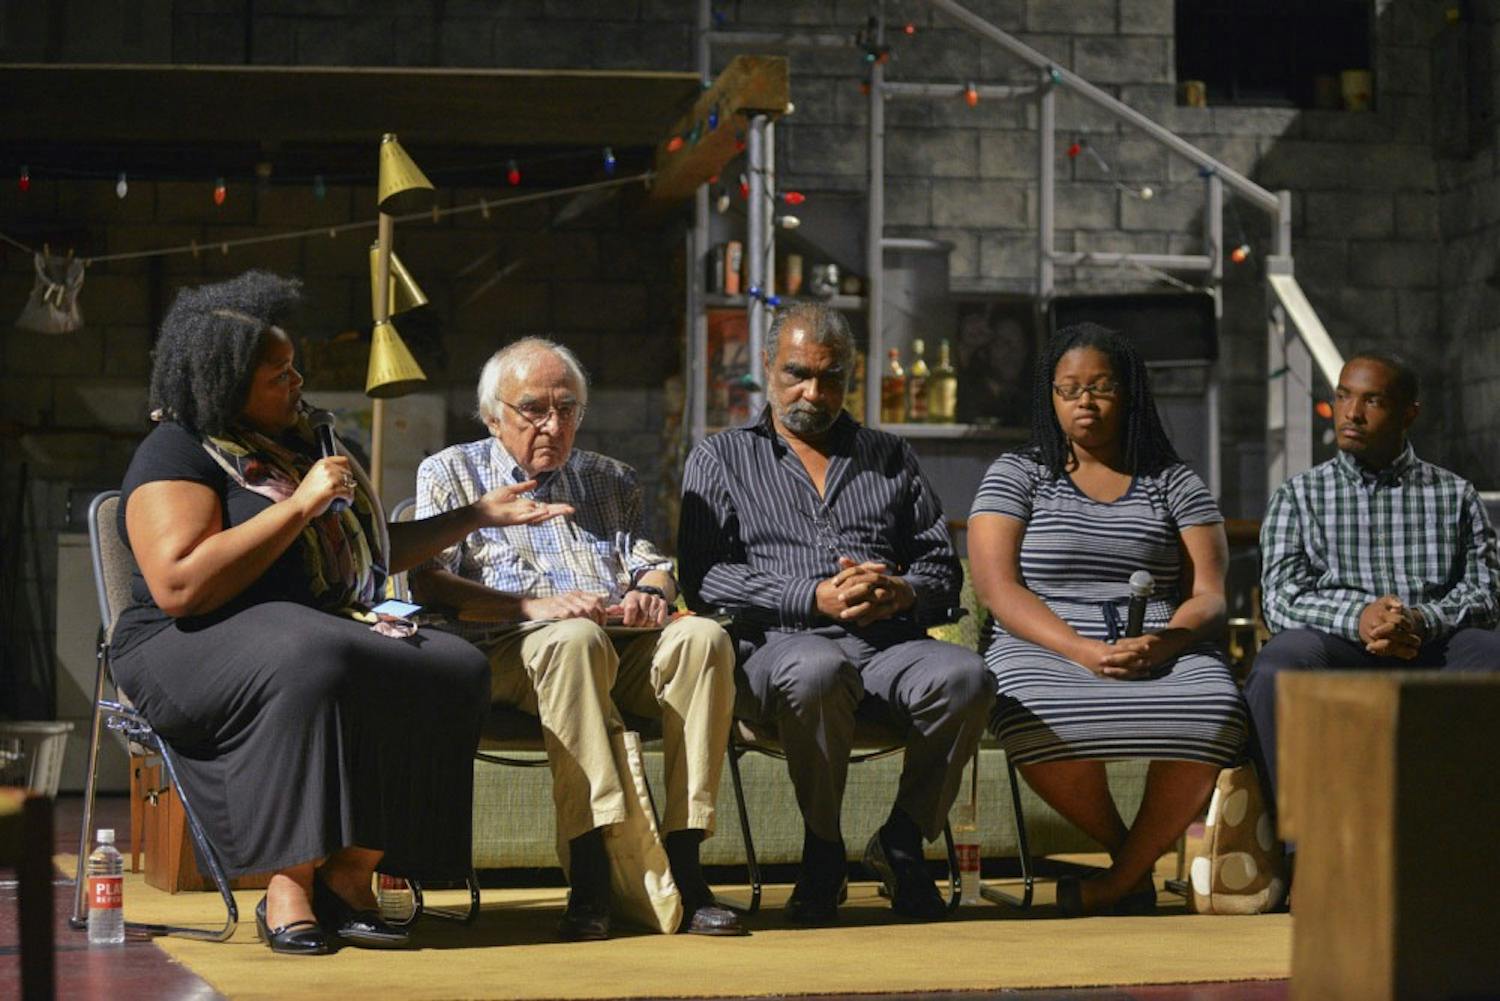 Jacqueline E. Lawton,  Philip Meyer, Perry A. Hall, Ariana Rivens and Brandon Yelverton participate in a group discussion about race relations in America. The discussion took place immediately following a showing of "Detroit '67" in The Center for Dramatic Art on Saturday, October 1st.